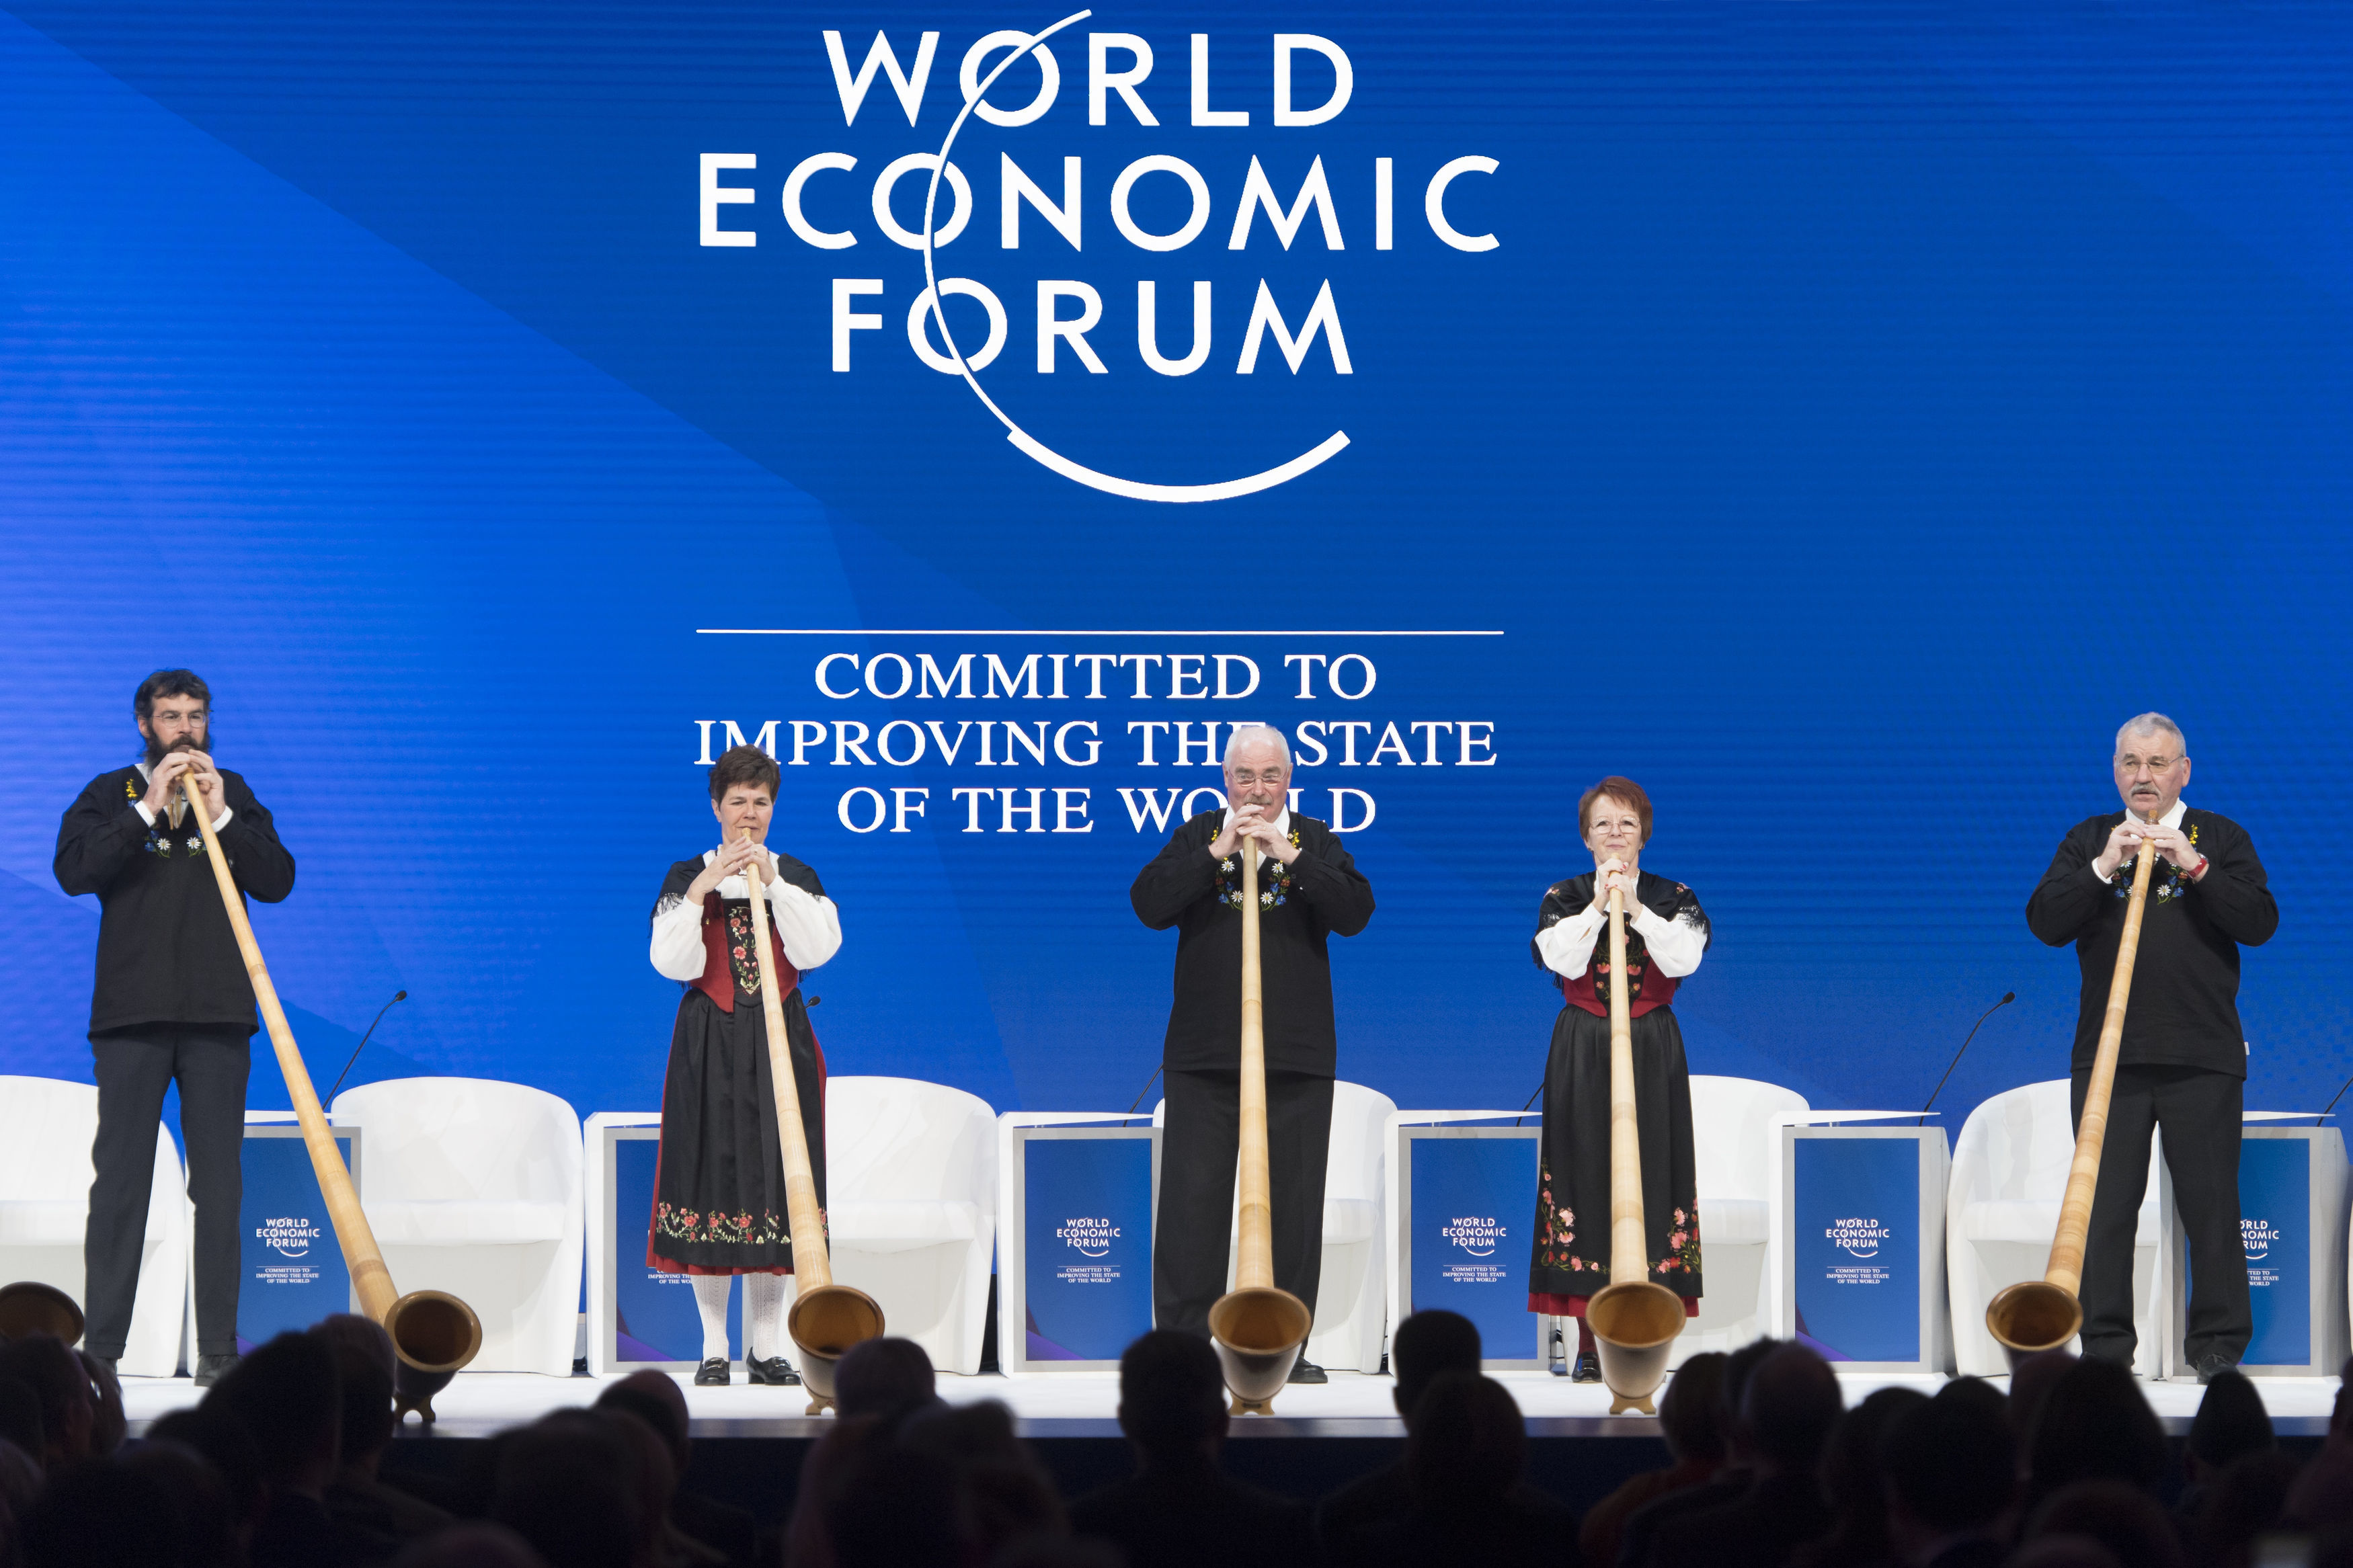 IN PICTURES The annual meeting of the World Economic Forum takes place